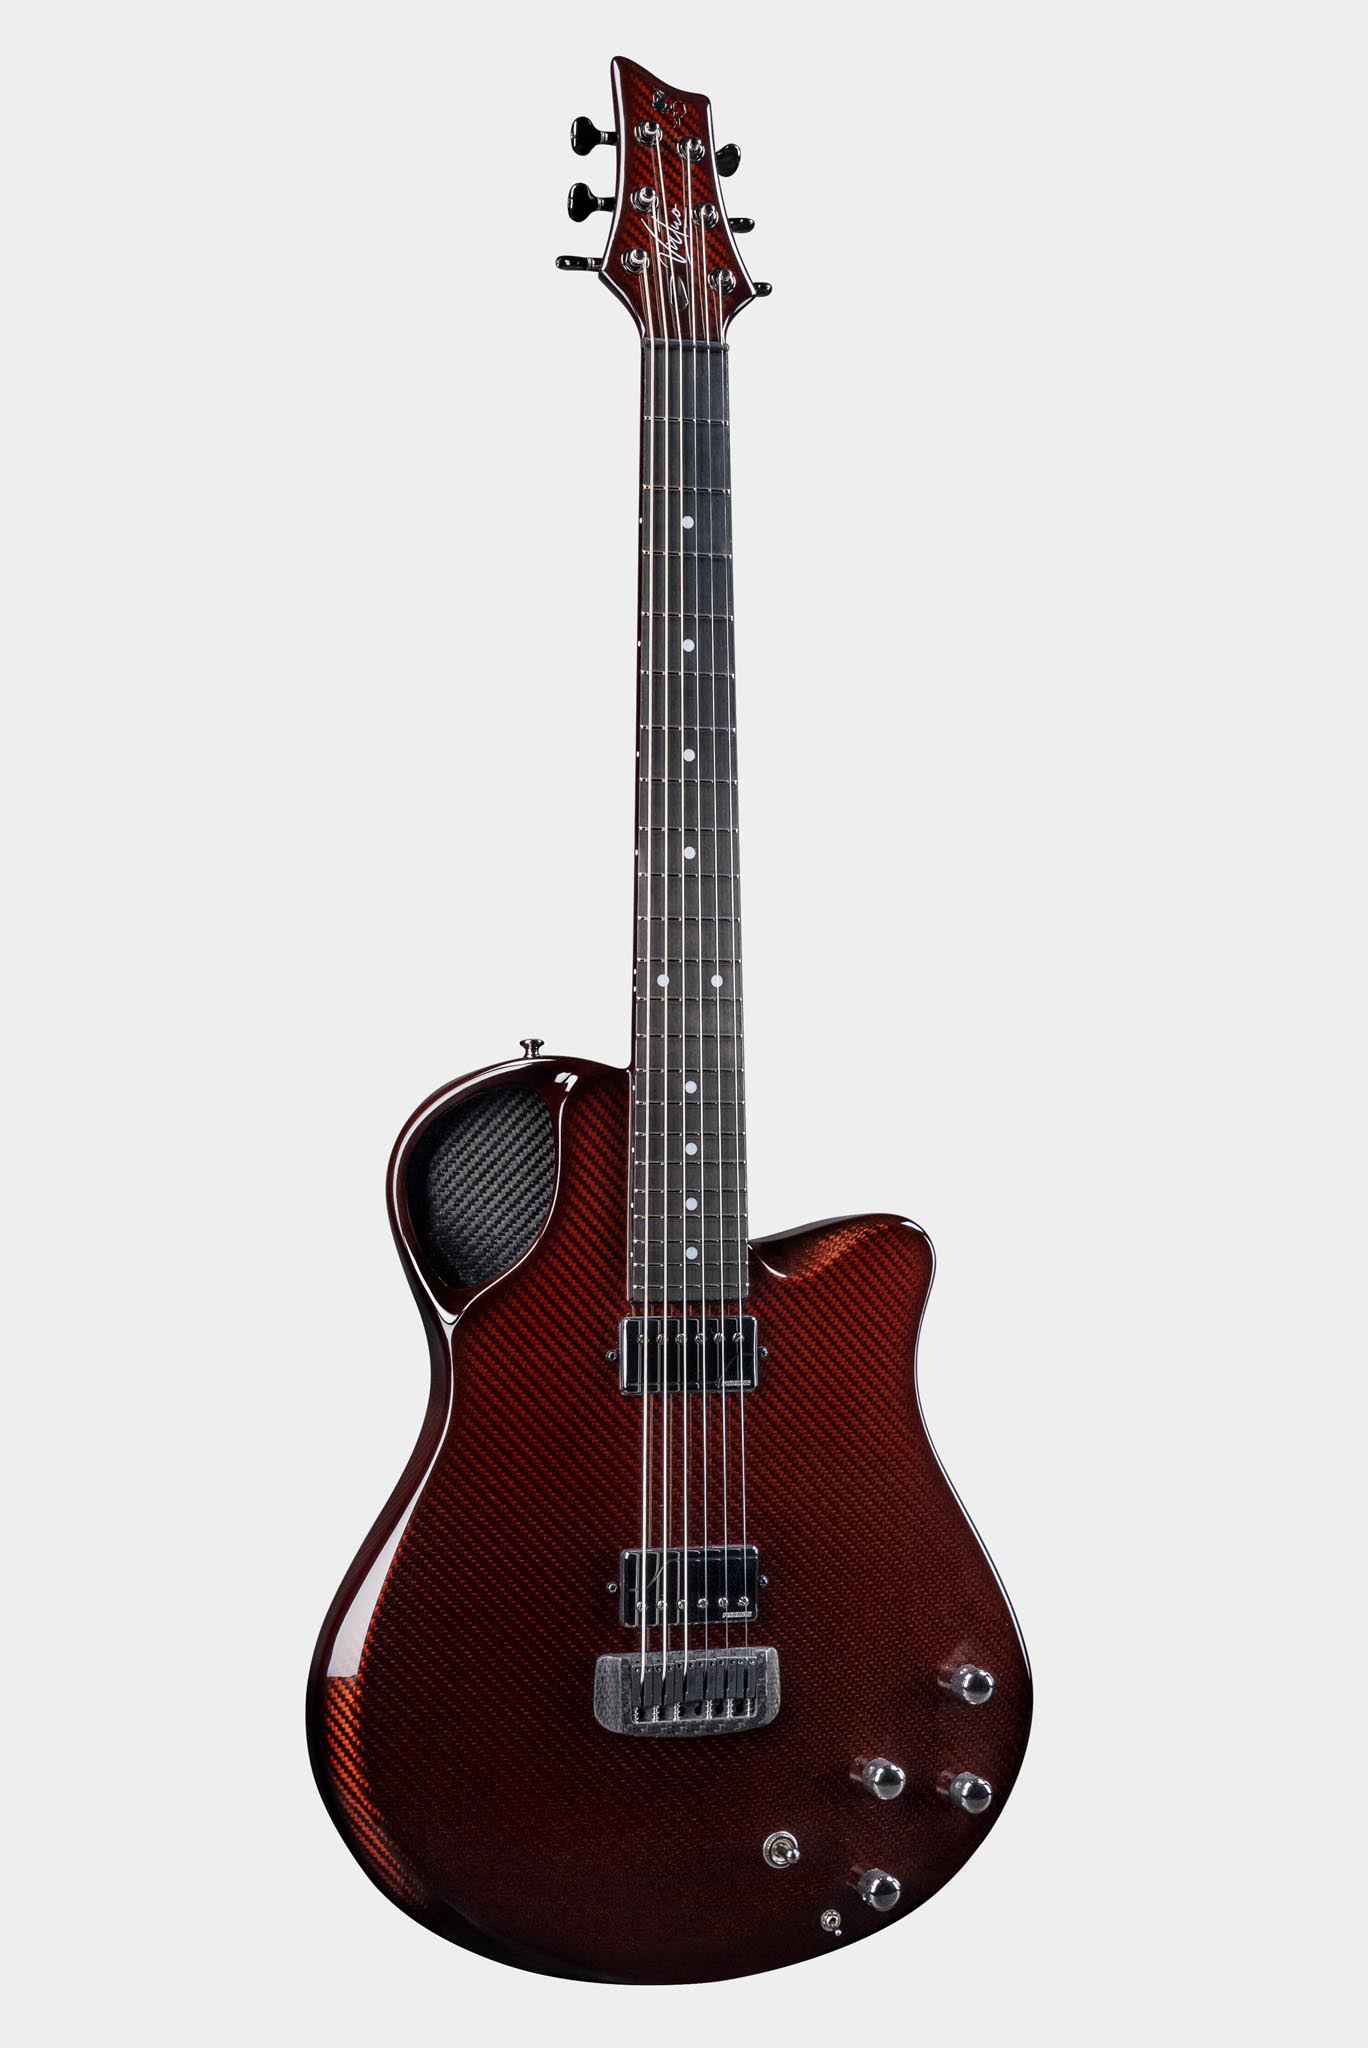 Red Emerald Virtuo Guitar